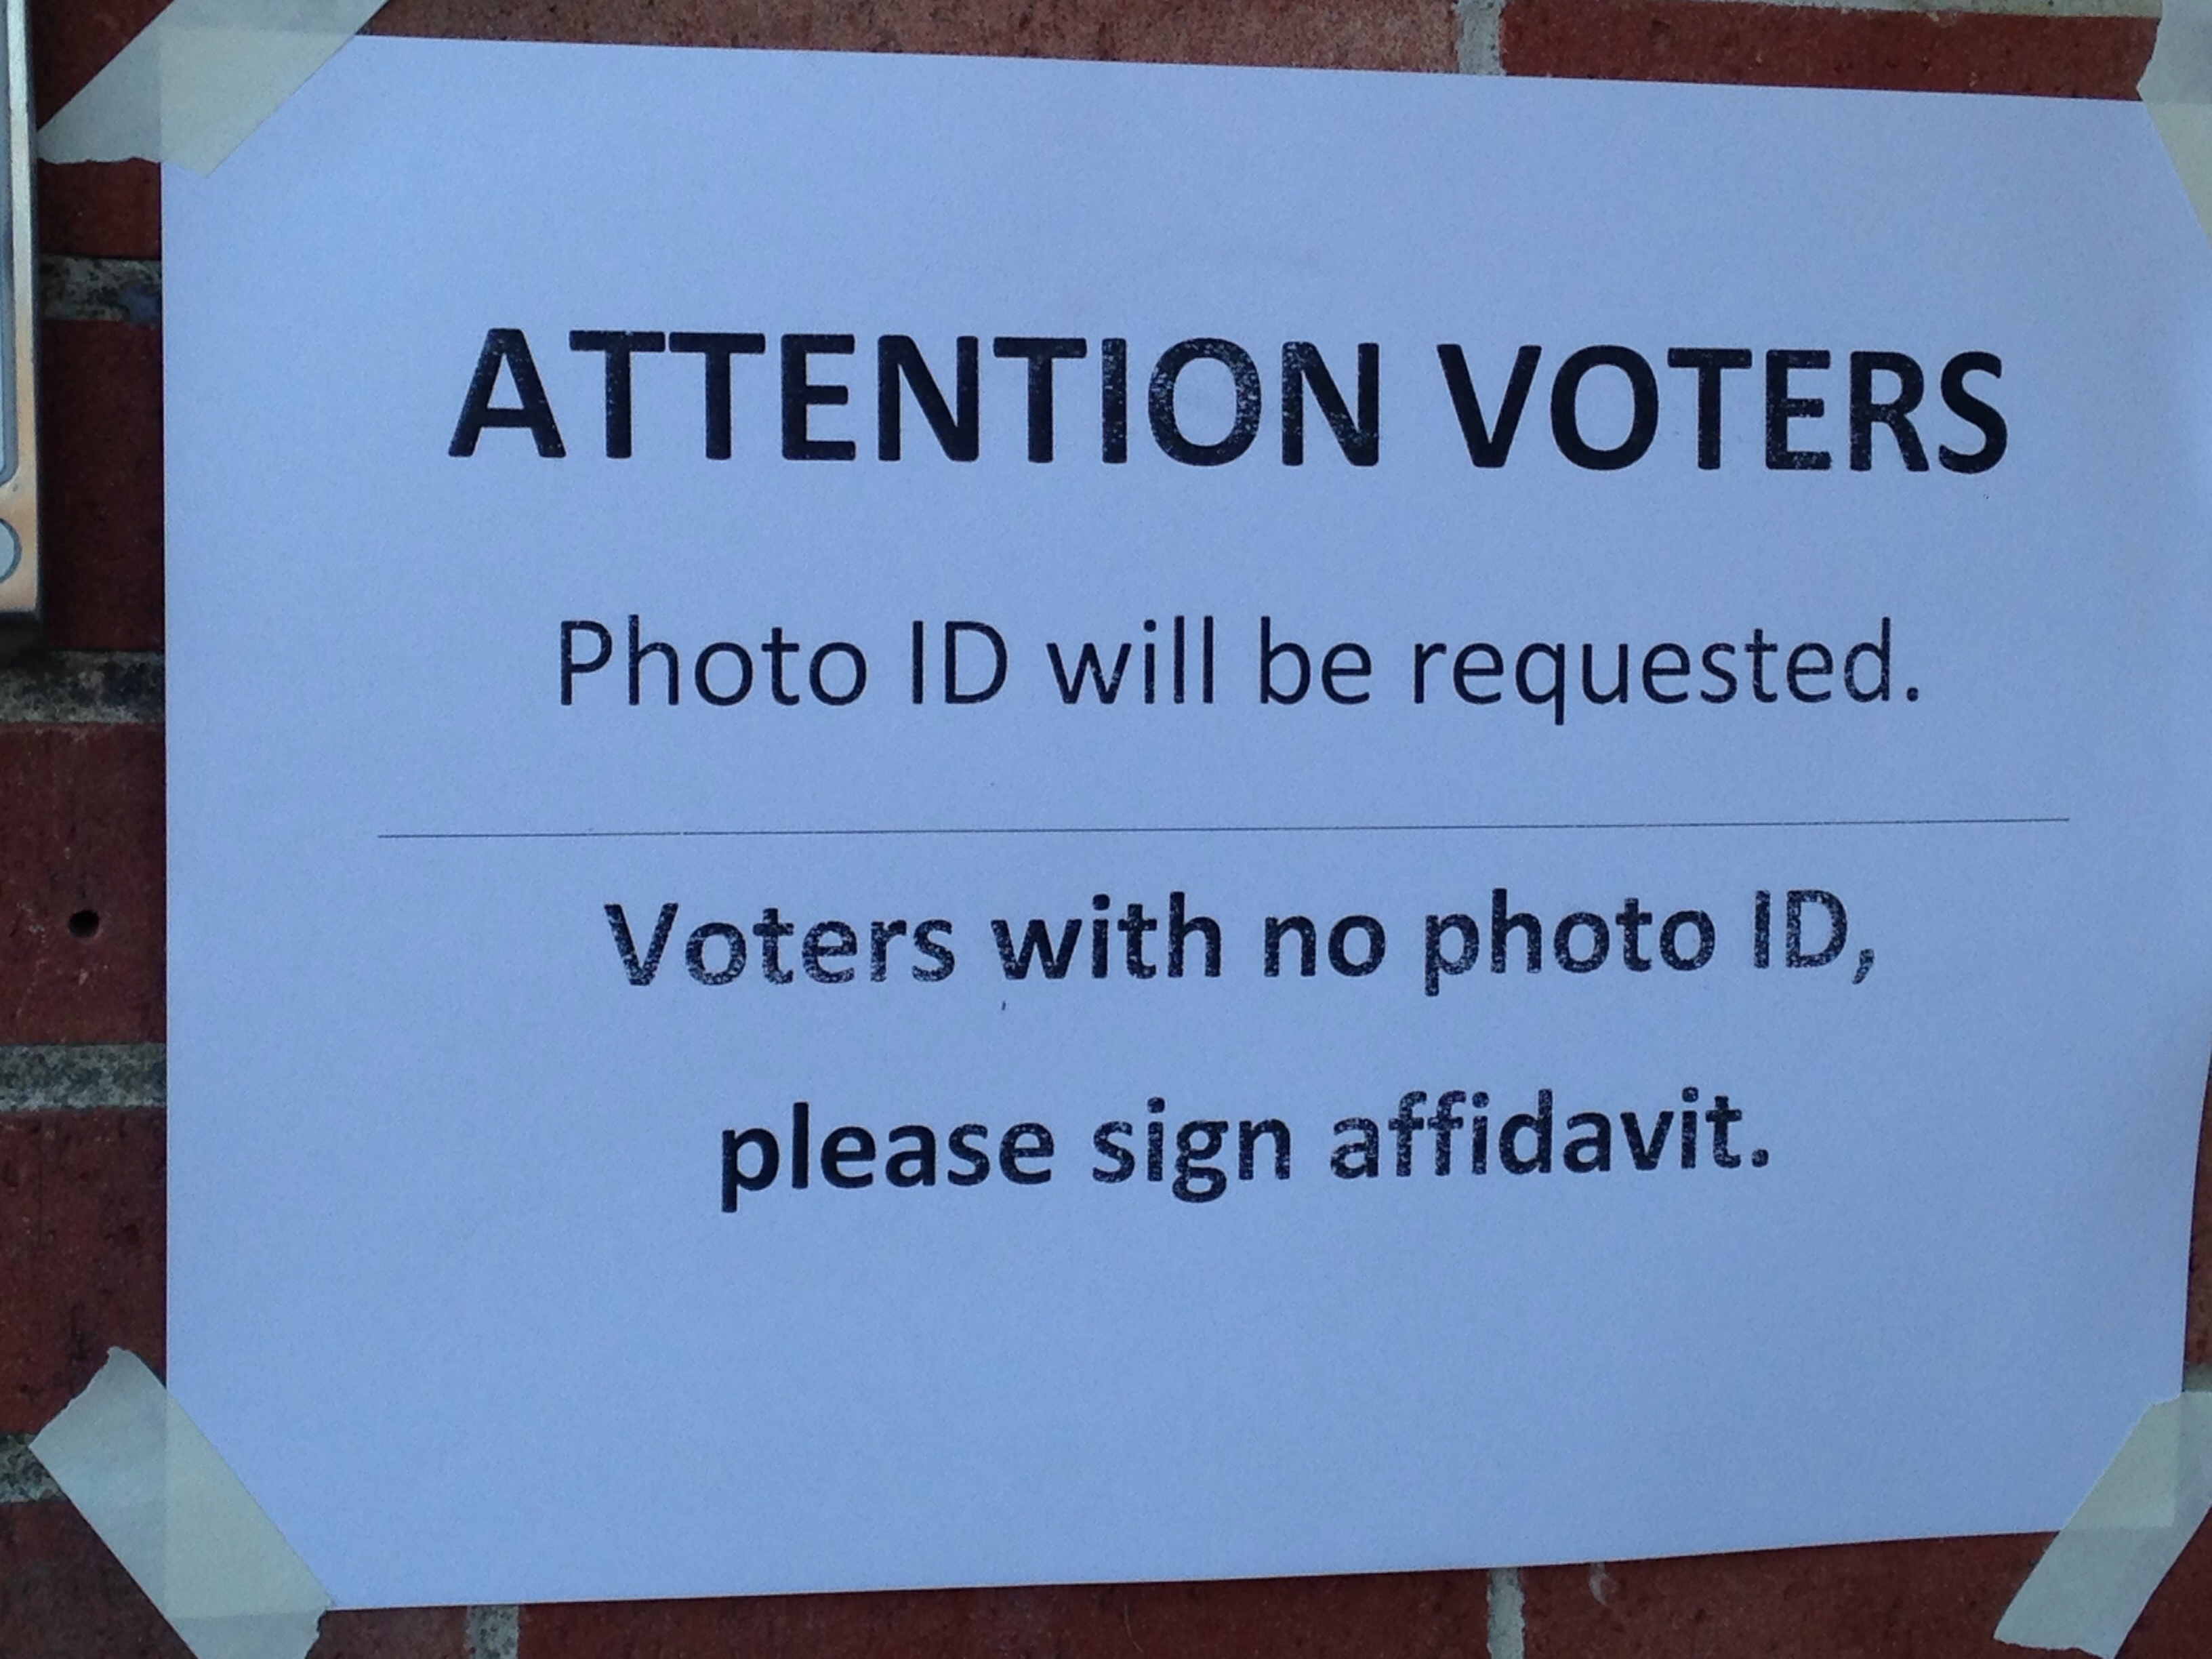 A piece of plain white paper taped to a window reads, "ATTENTION VOTERS: Photo ID will be requested. Voteres with no photo ID, please sign affadavit."